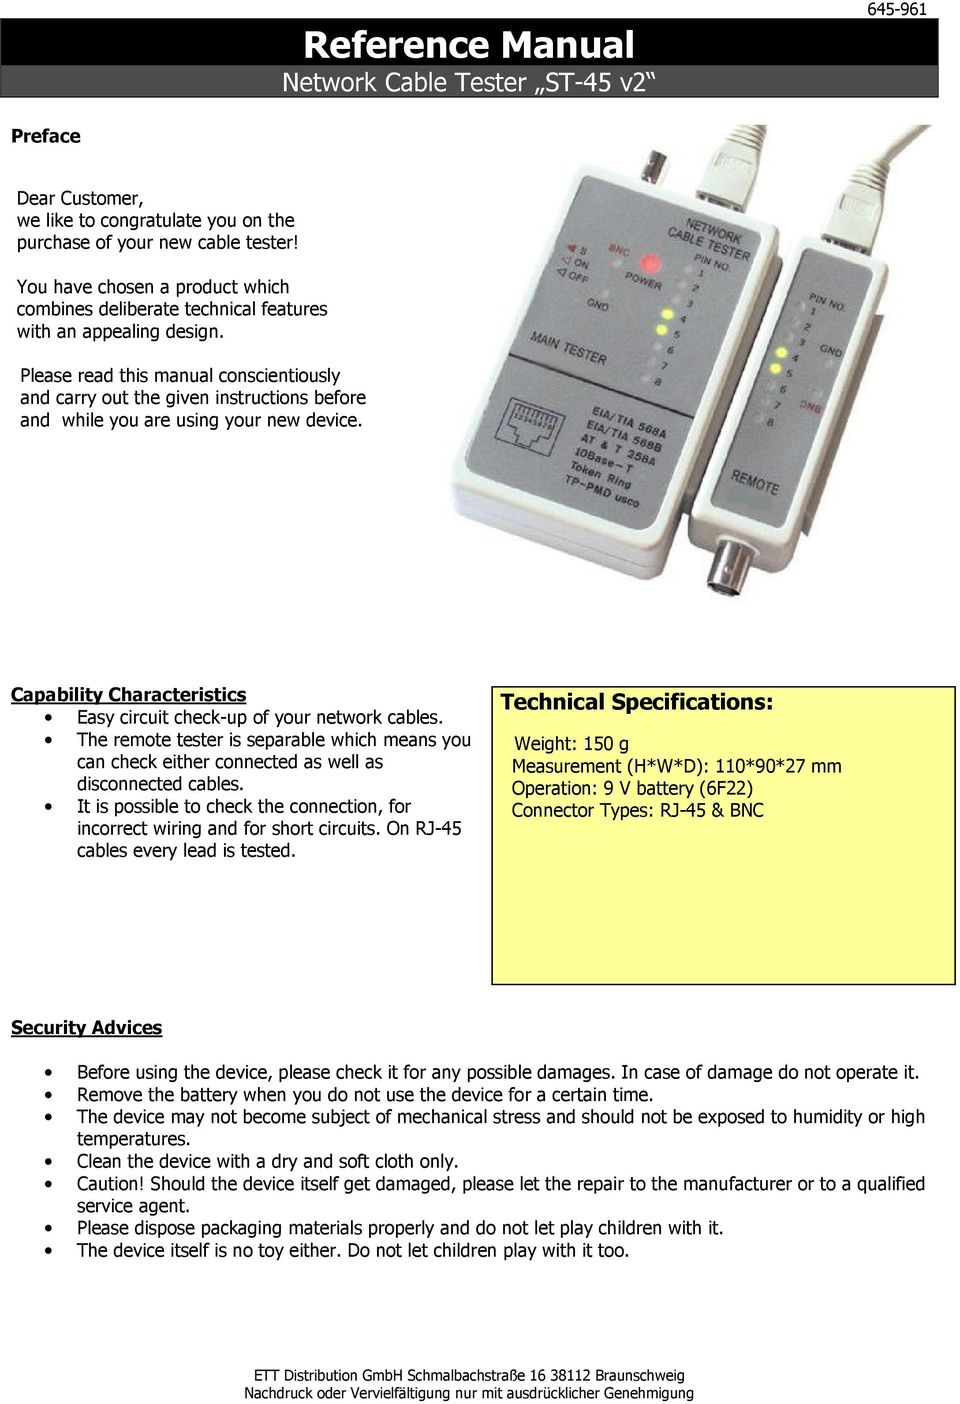 Please read this manual conscientiously and carry out the given instructions before and while you are using your new device. Capability Characteristics Easy circuit check-up of your network cables.